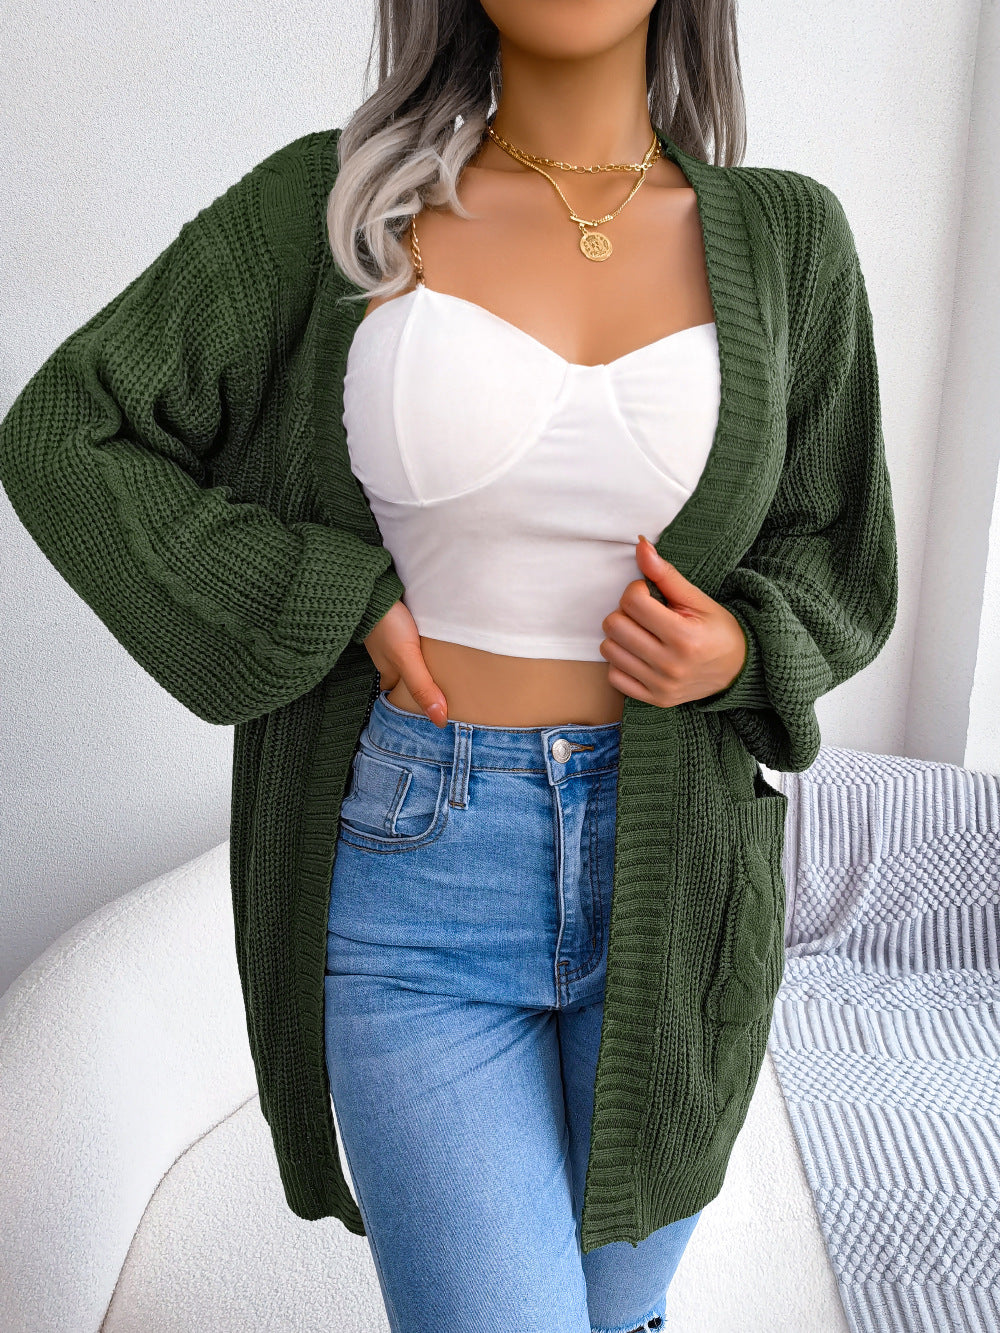 Trendsi Cupid Beauty Supplies Olive / S Woman Cardigan Cable-Knit Open Front Pocketed Cardigan